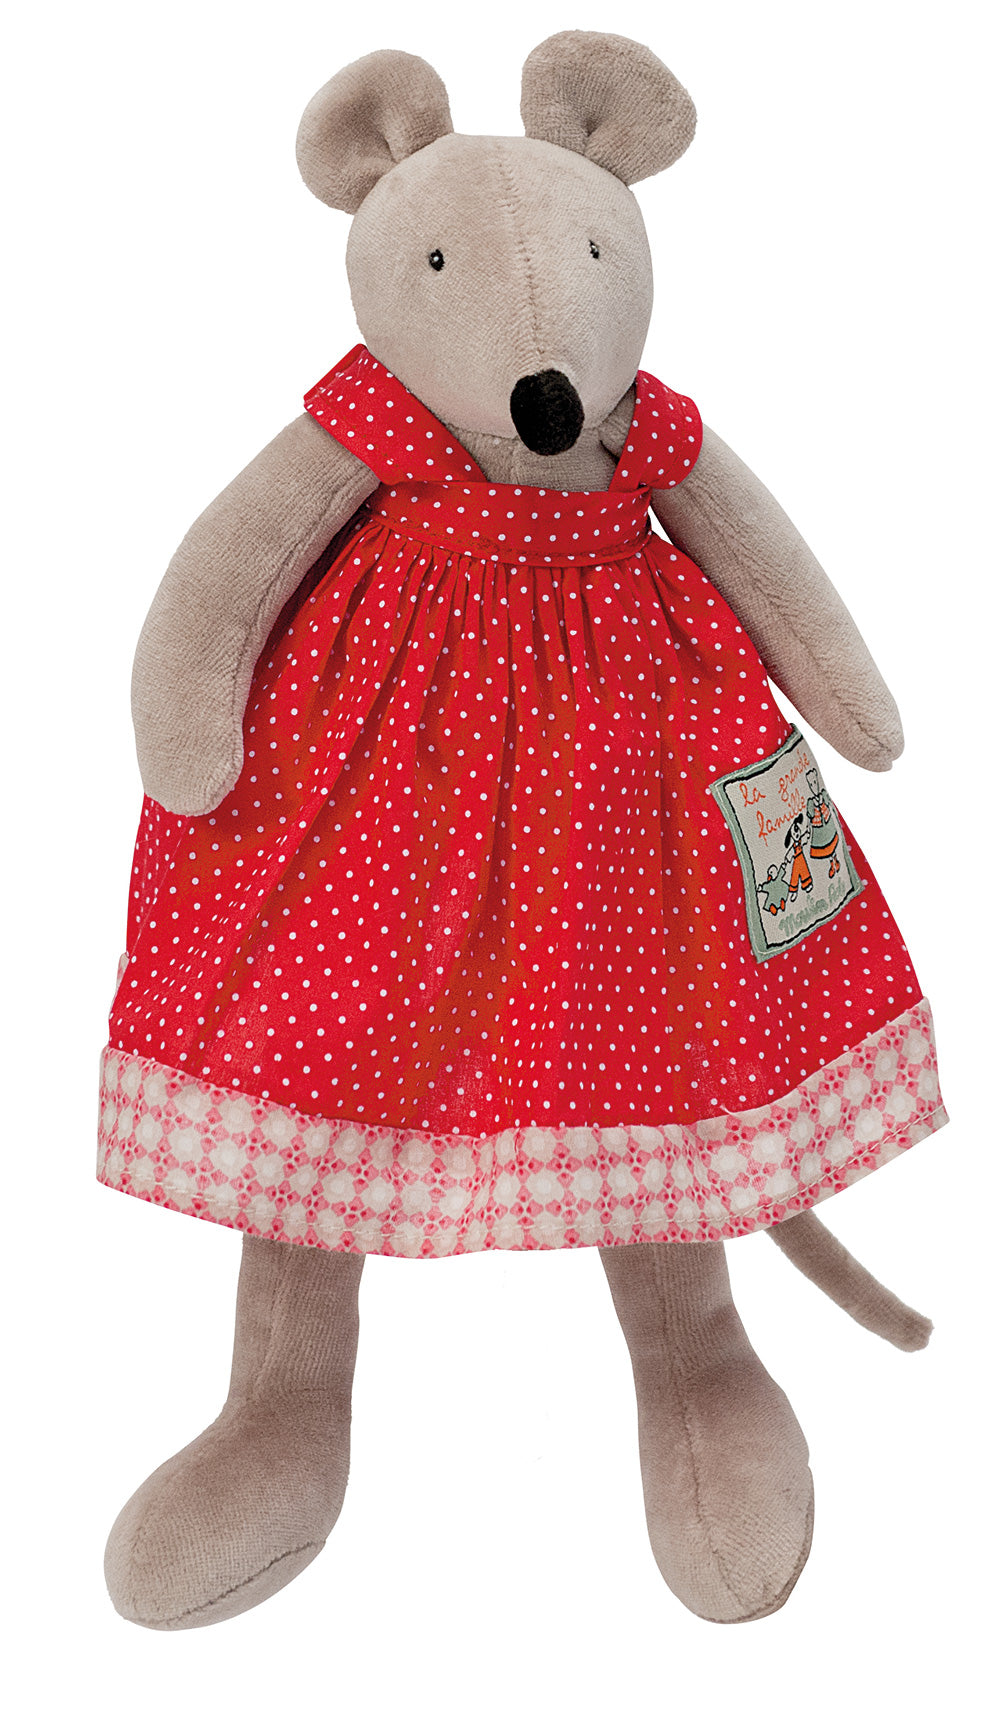 Moulin Roty | Cotton Soft Toy | 'La Grande Famille' Nini The Mouse in Red Dress | Size: 30cm | Age: 0+